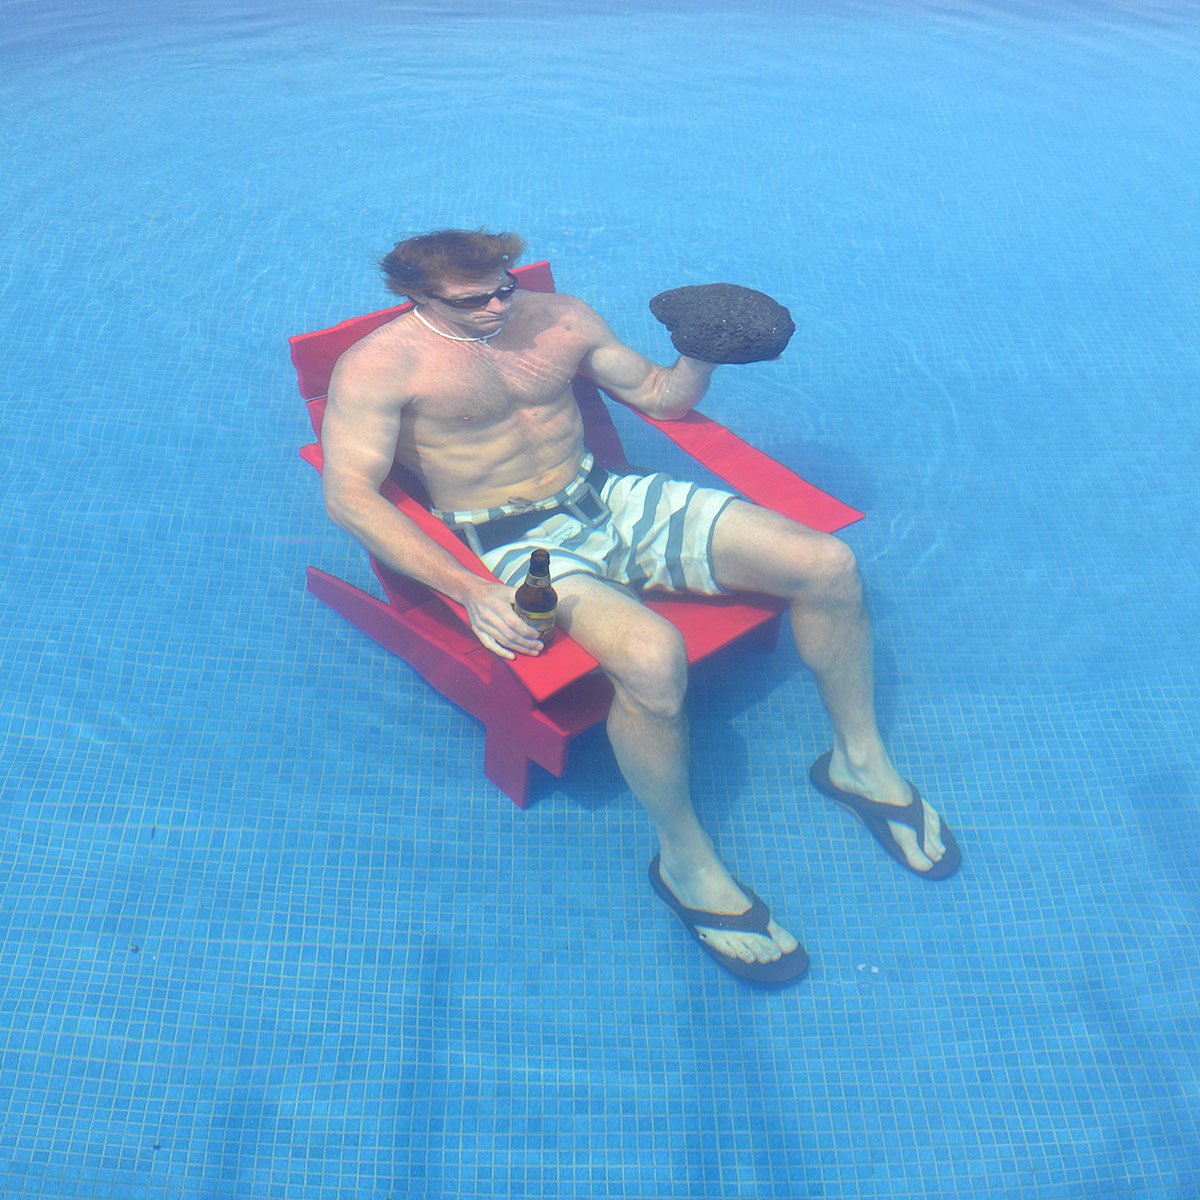 lollygagger lounge chair underwater pool